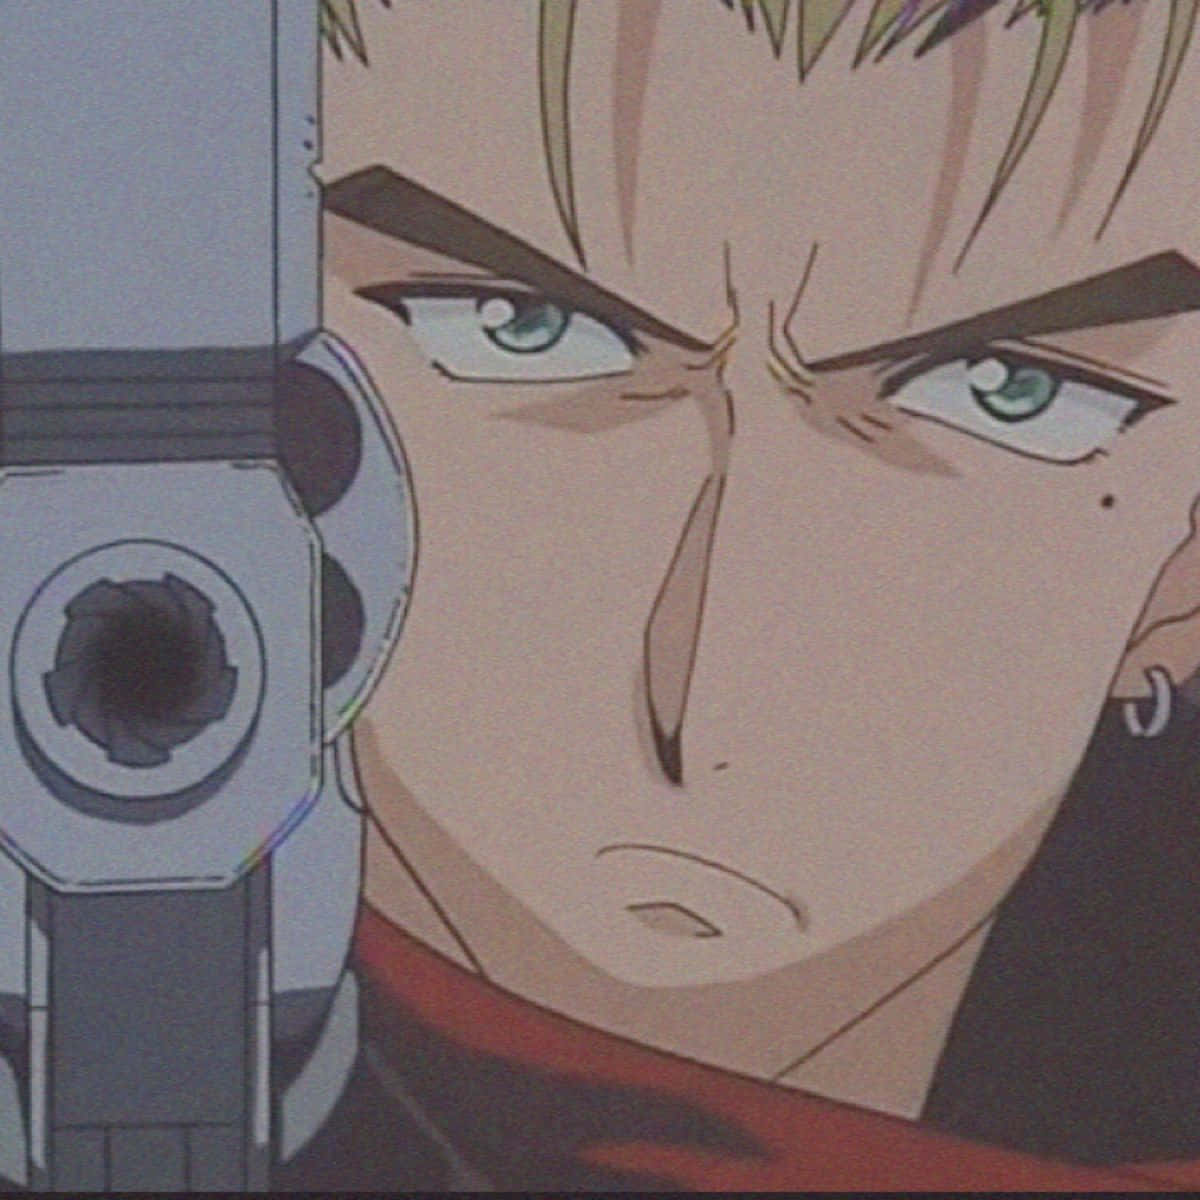 Fighting for justice in Trigun